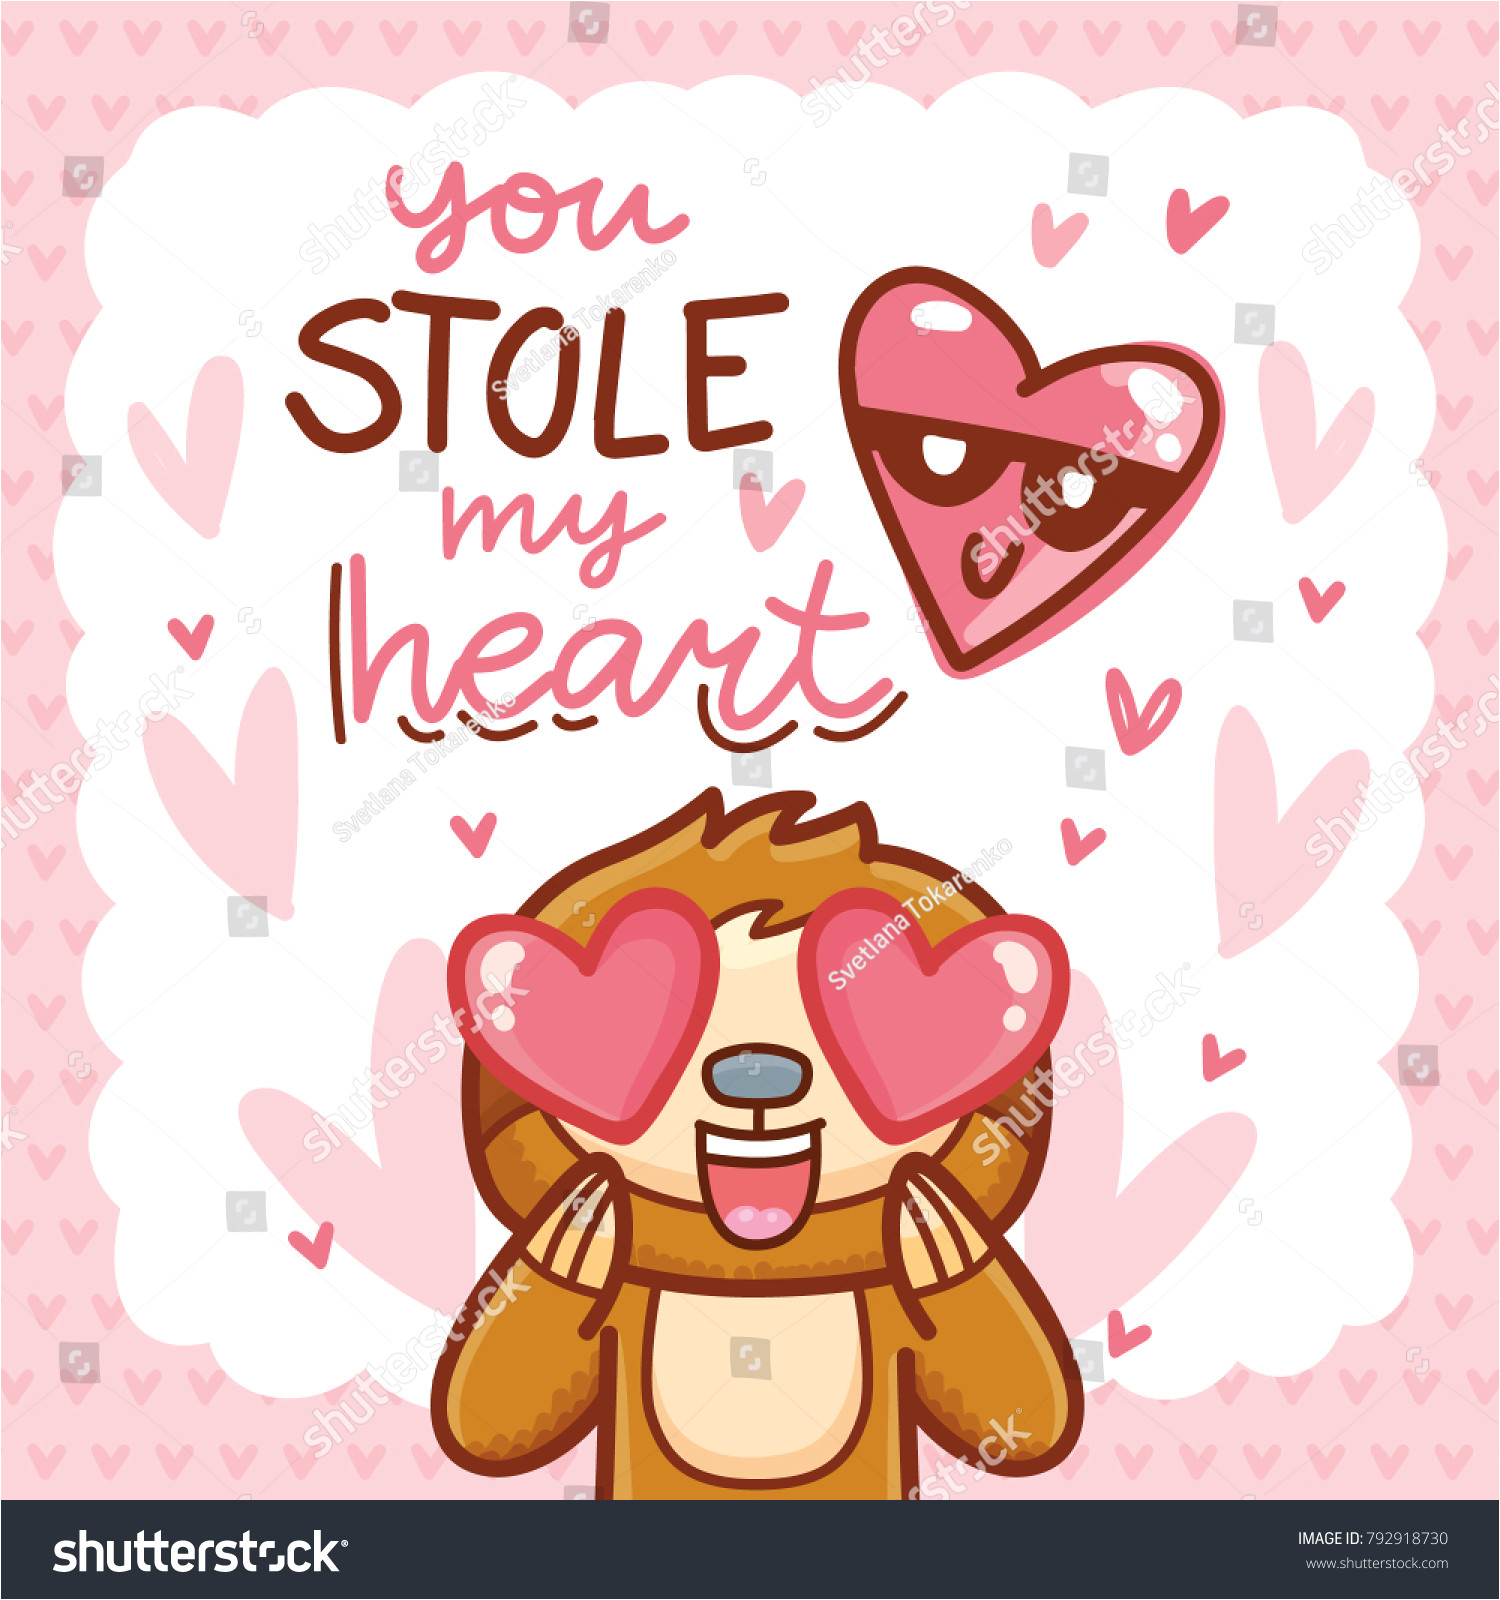 stock vector cute sloth character with hearts in eyes admiring madly in love with lettering calligraphy text 792918730 jpg